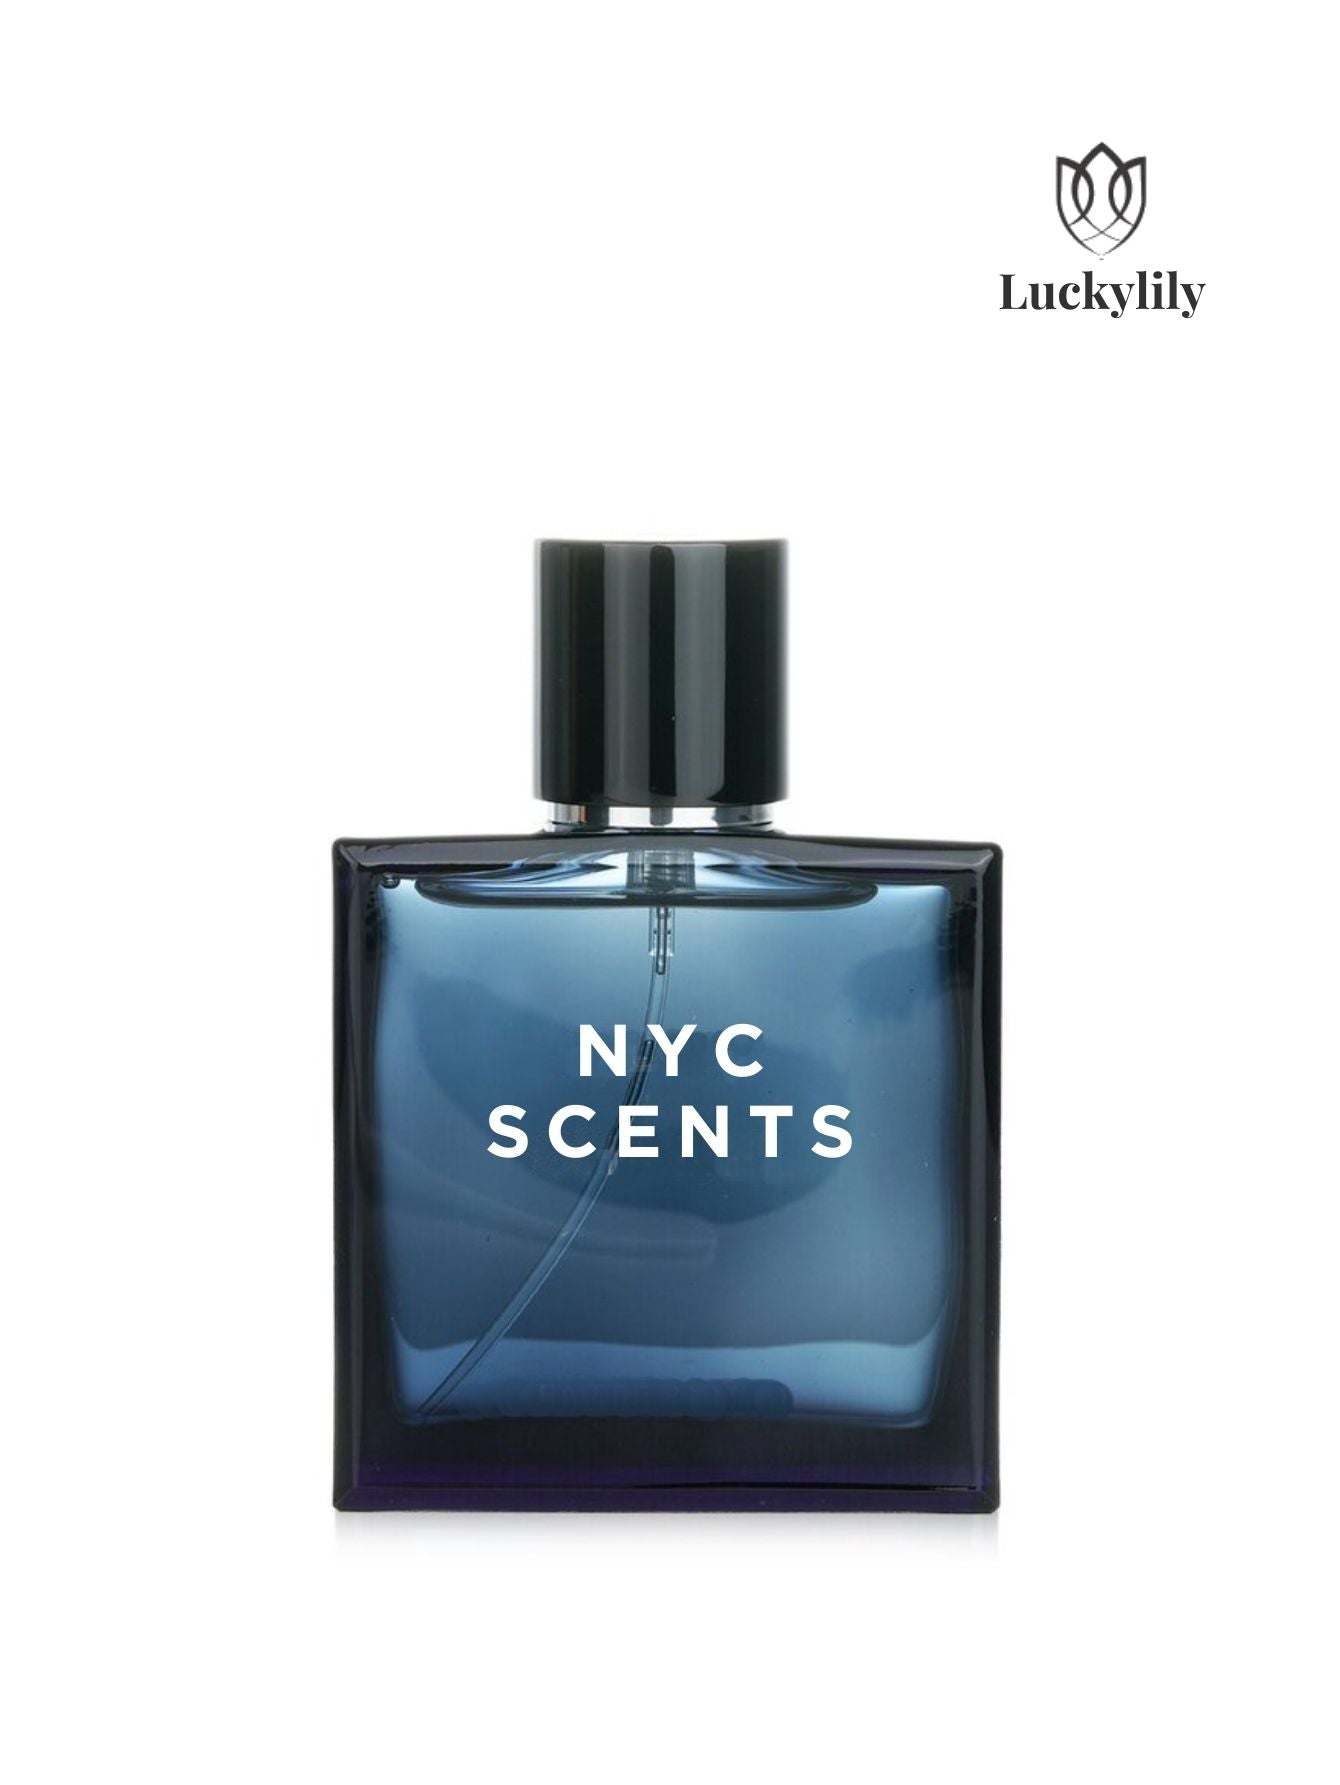 Set Night Lure NYC SCENTS – Luckylily Cosmetics